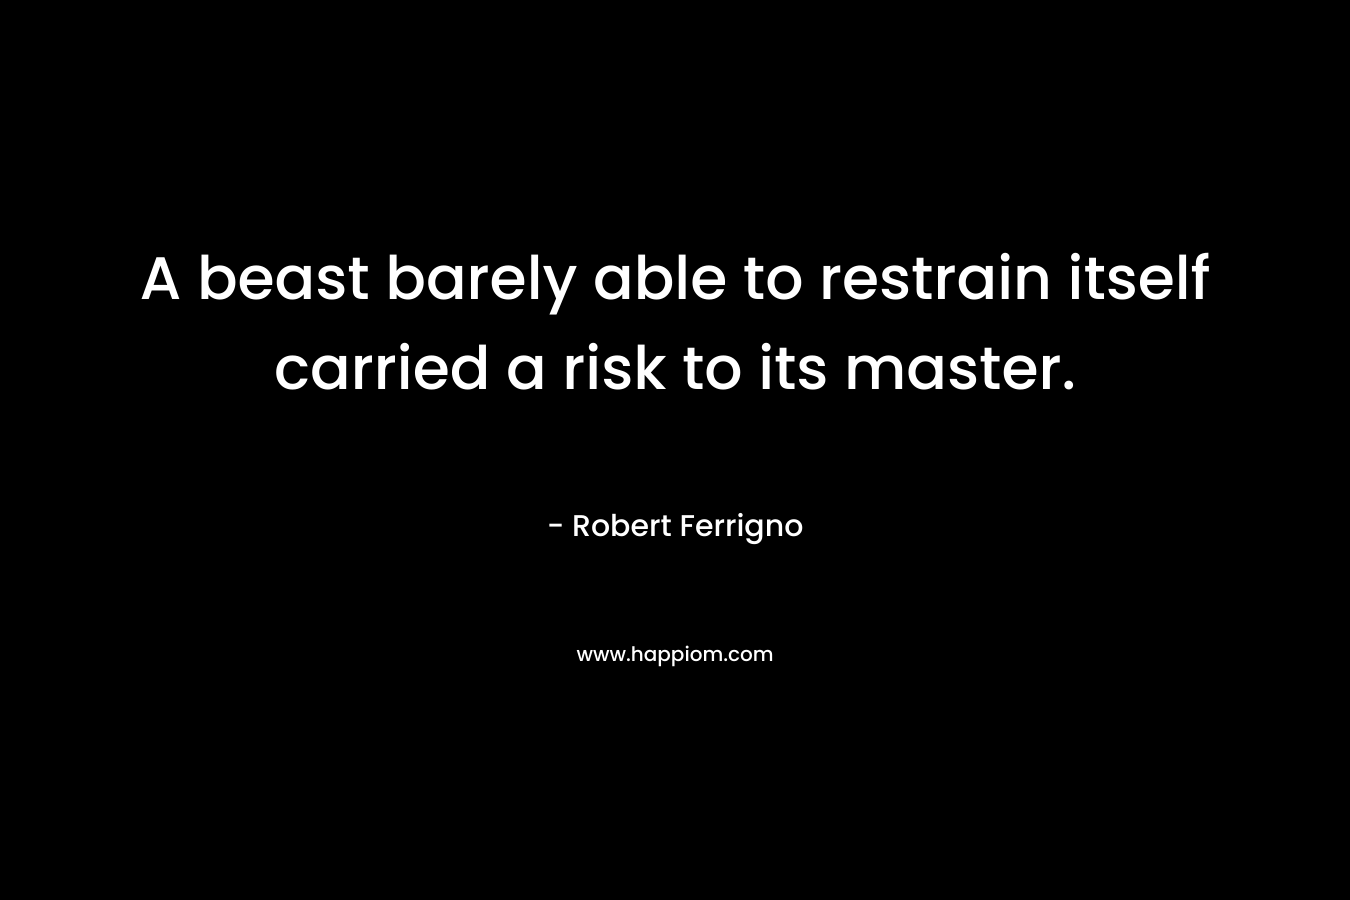 A beast barely able to restrain itself carried a risk to its master. – Robert Ferrigno